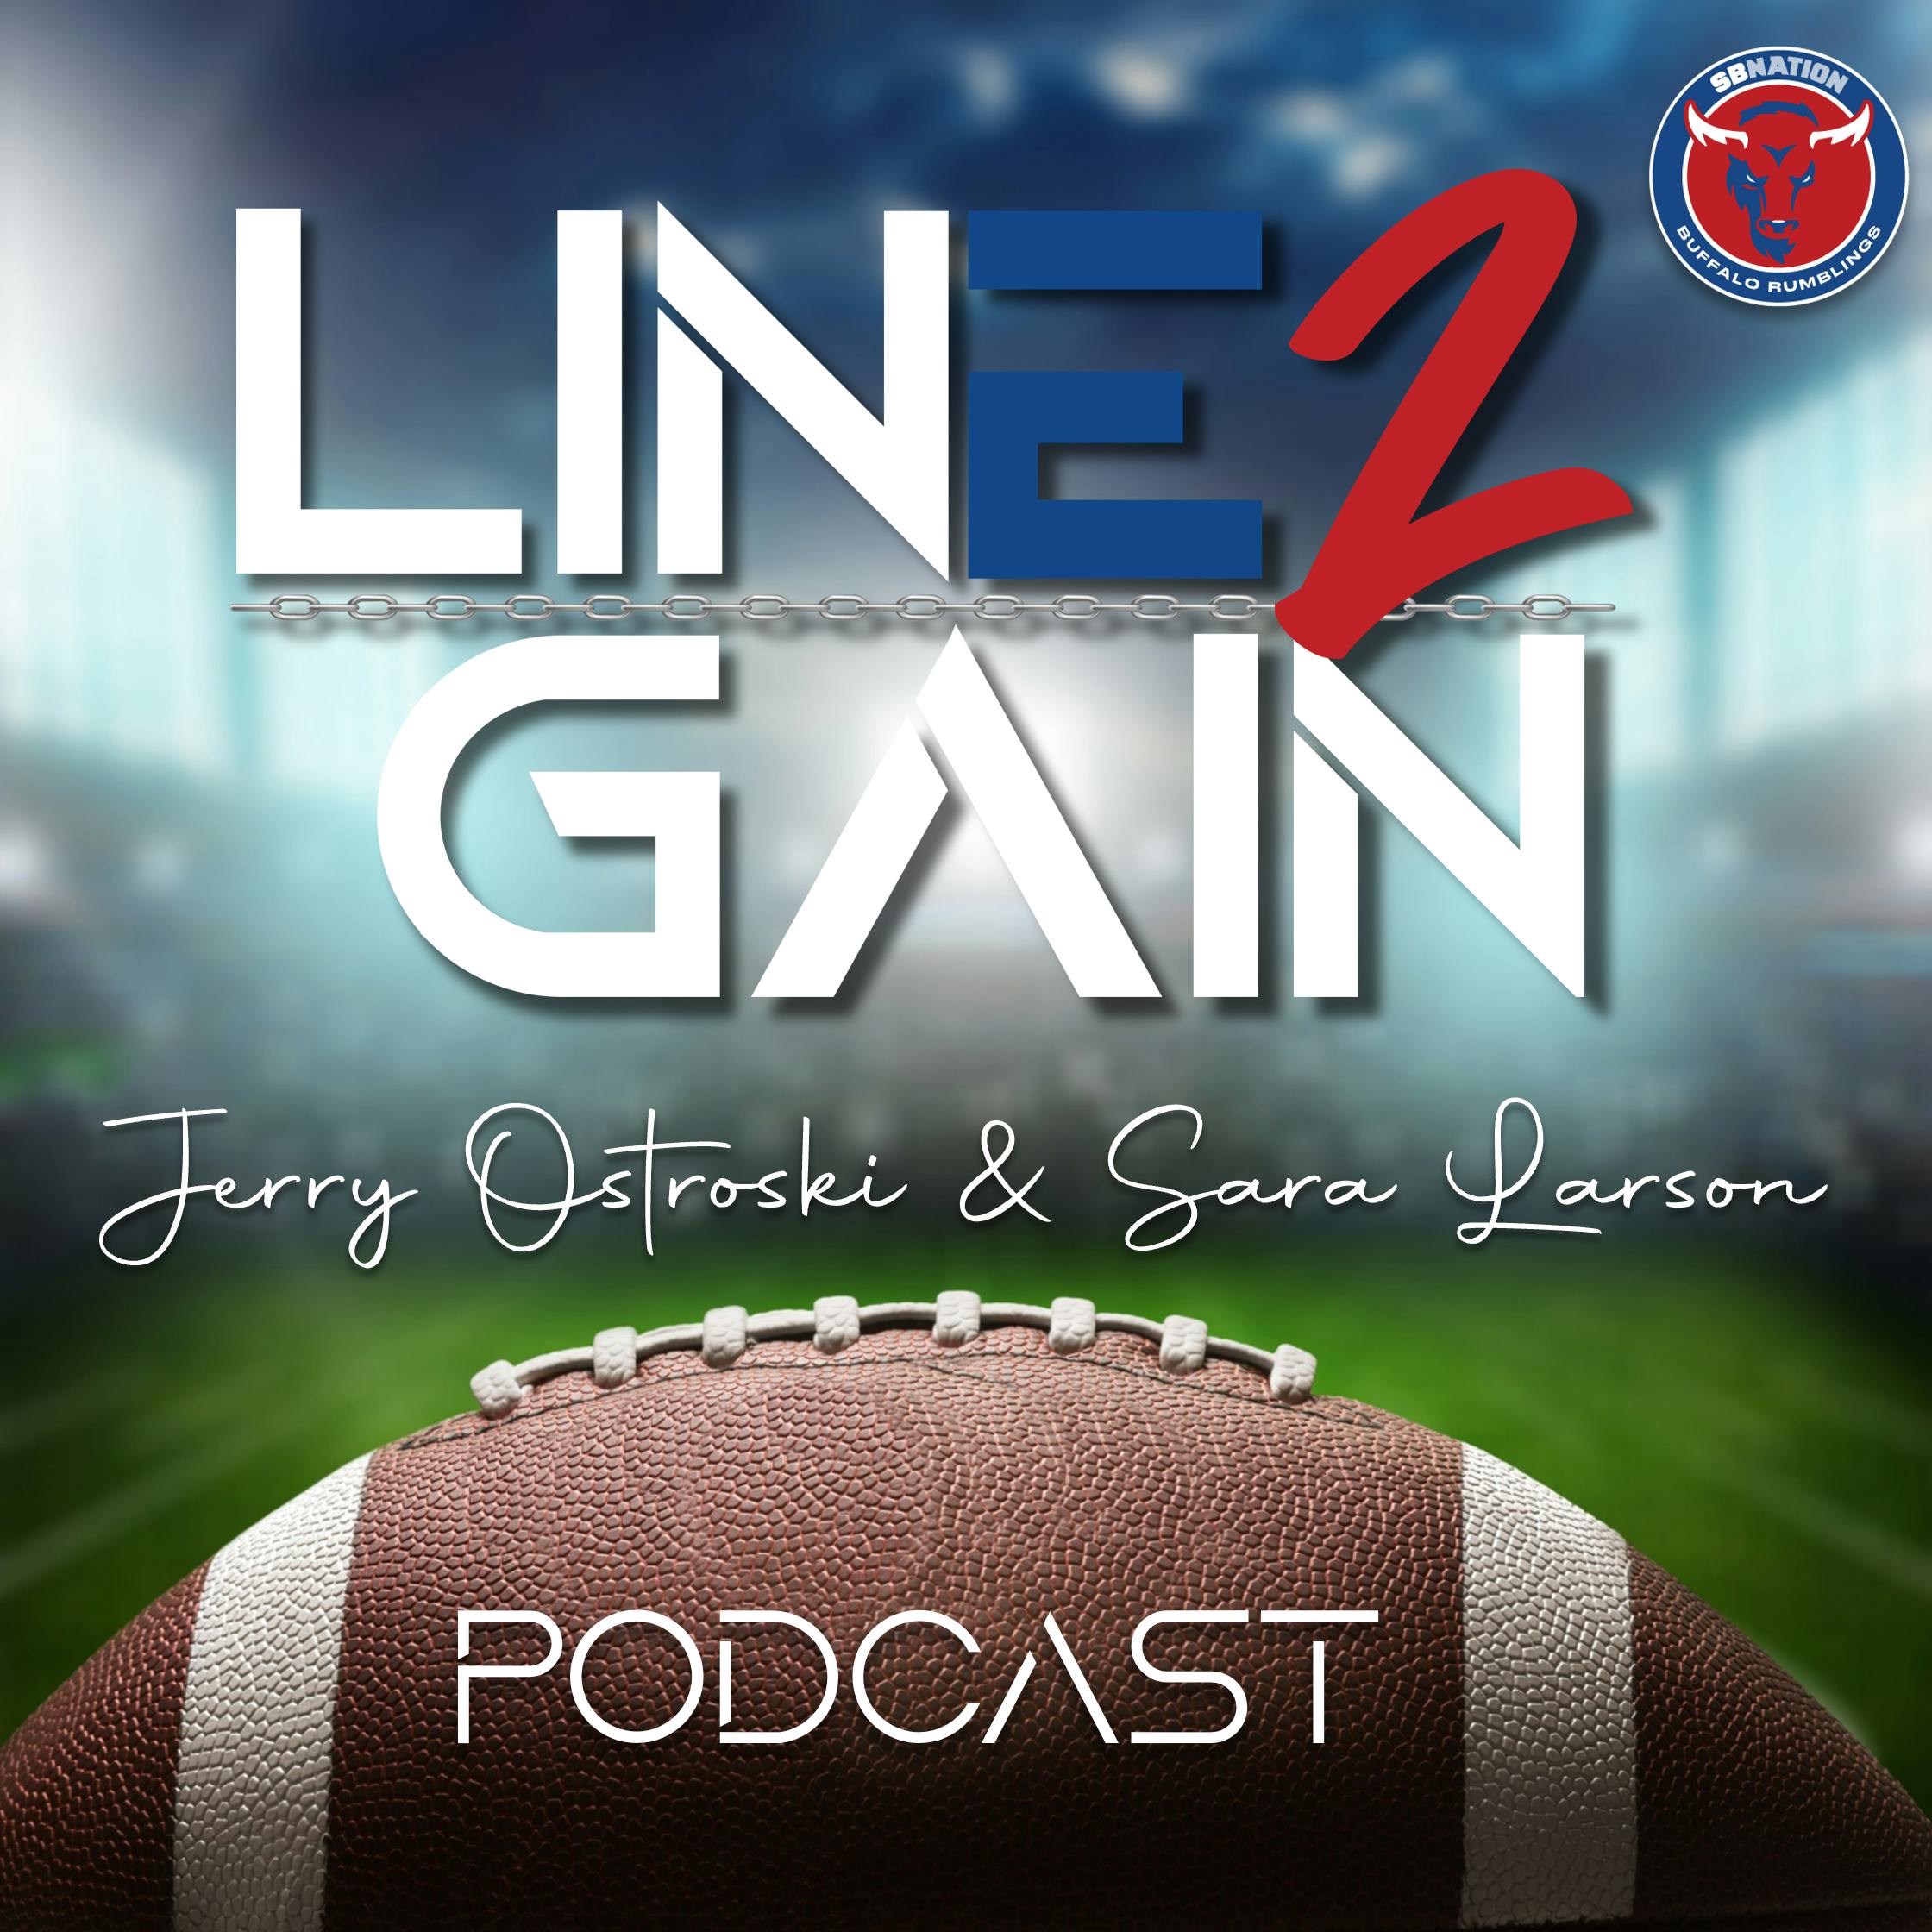 Line 2 Gain: More Off-Season Chat with Jerry Ostroski & Sara Larson